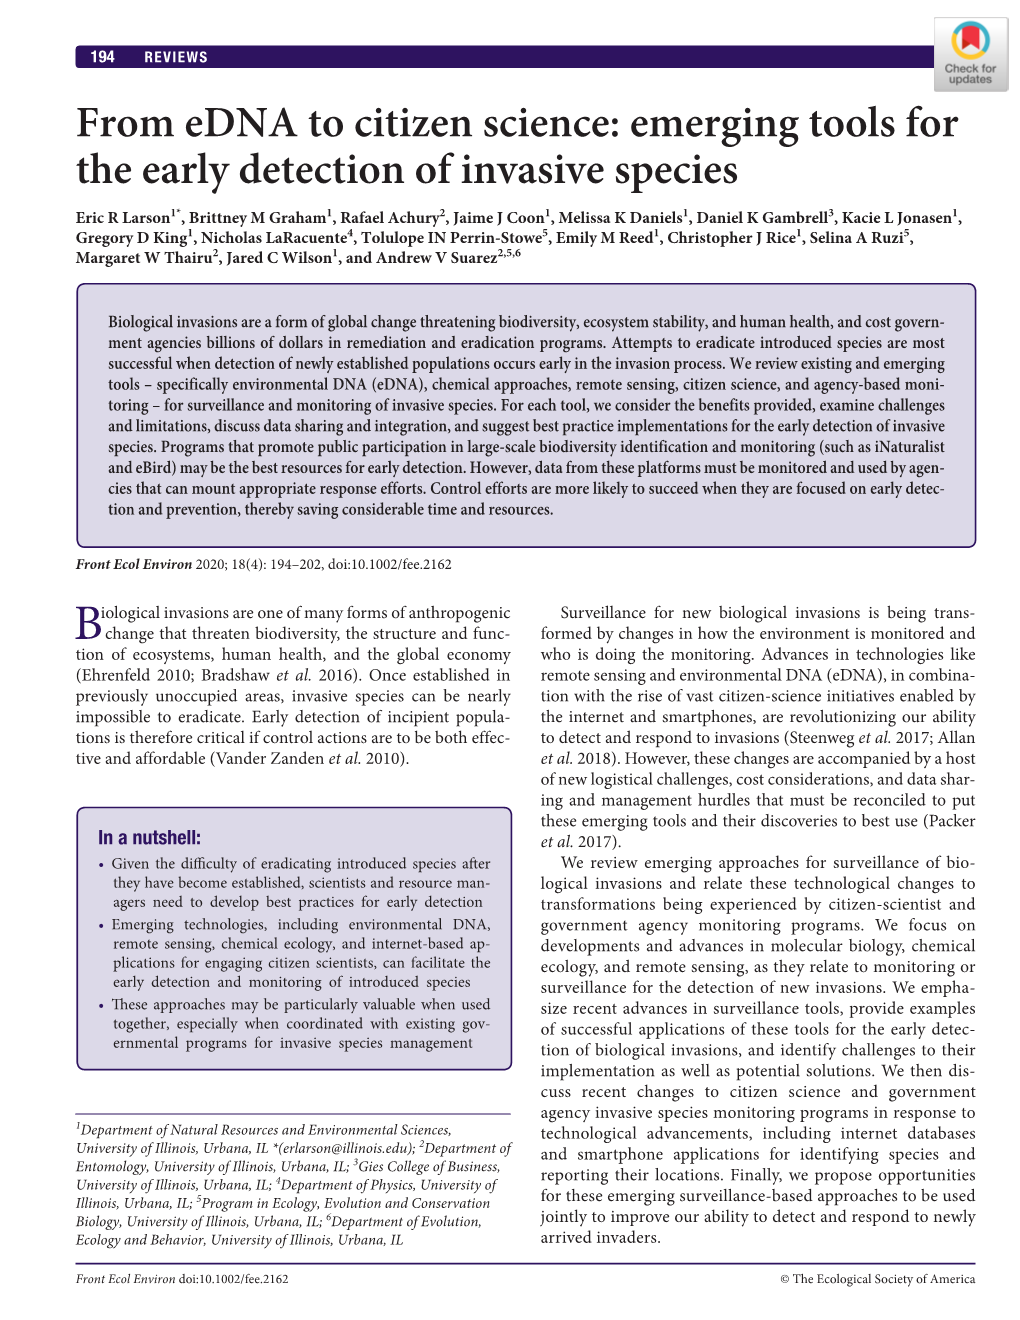 From Edna to Citizen Science: Emerging Tools for the Early Detection of Invasive Species